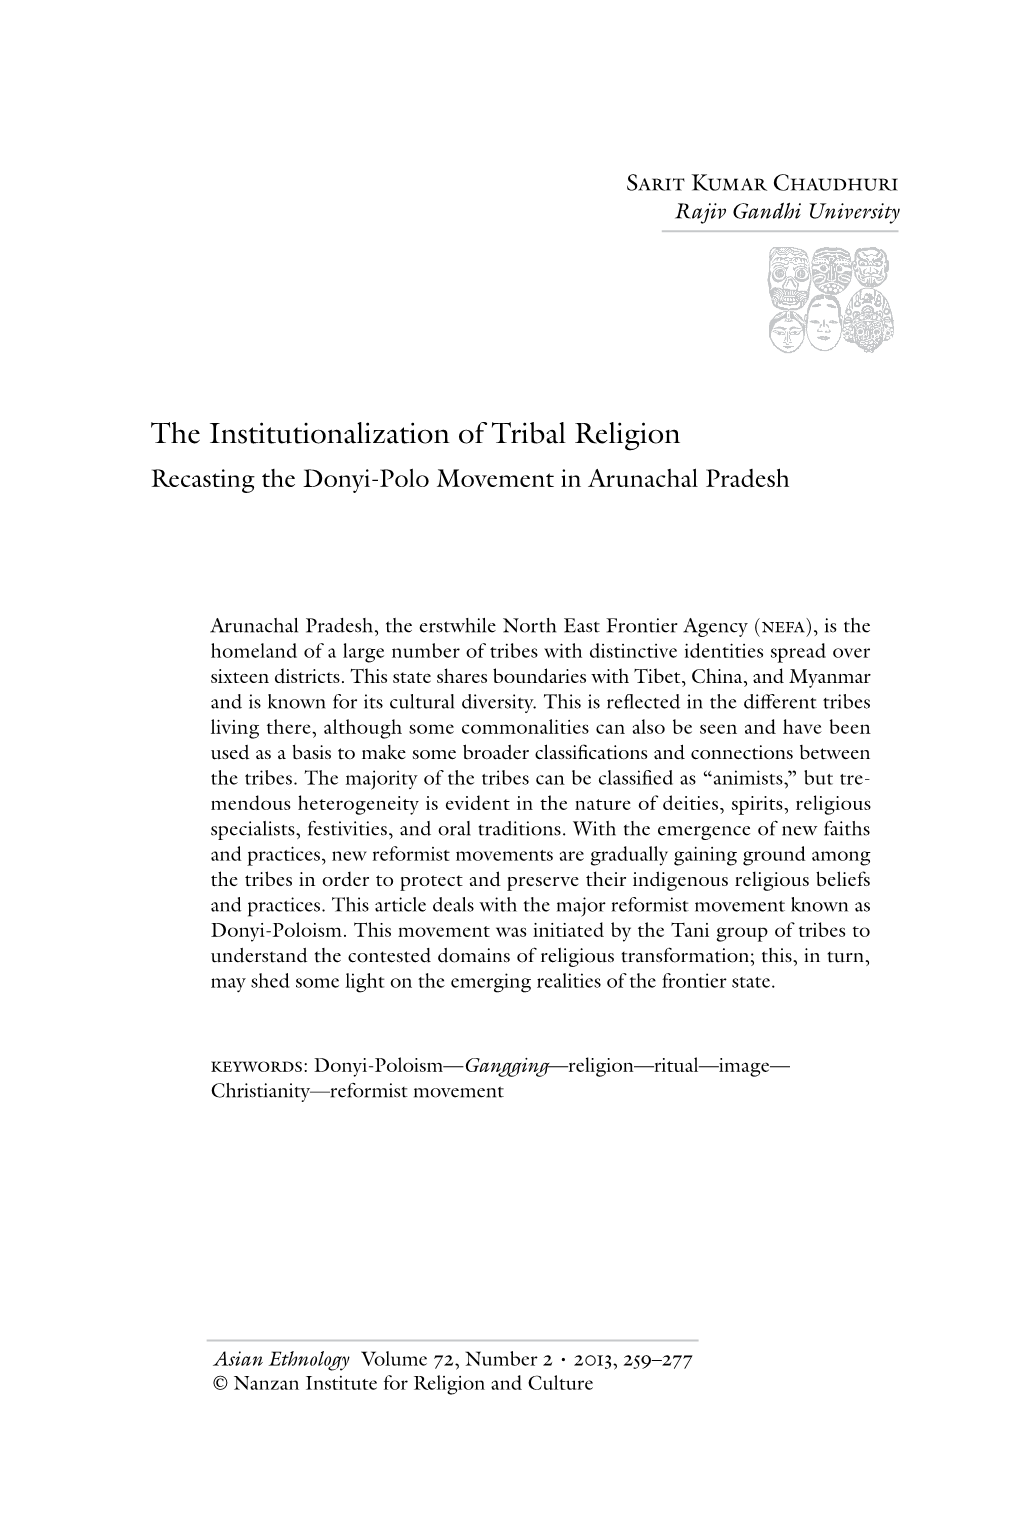 The Institutionalization of Tribal Religion Recasting the Donyi-Polo Movement in Arunachal Pradesh